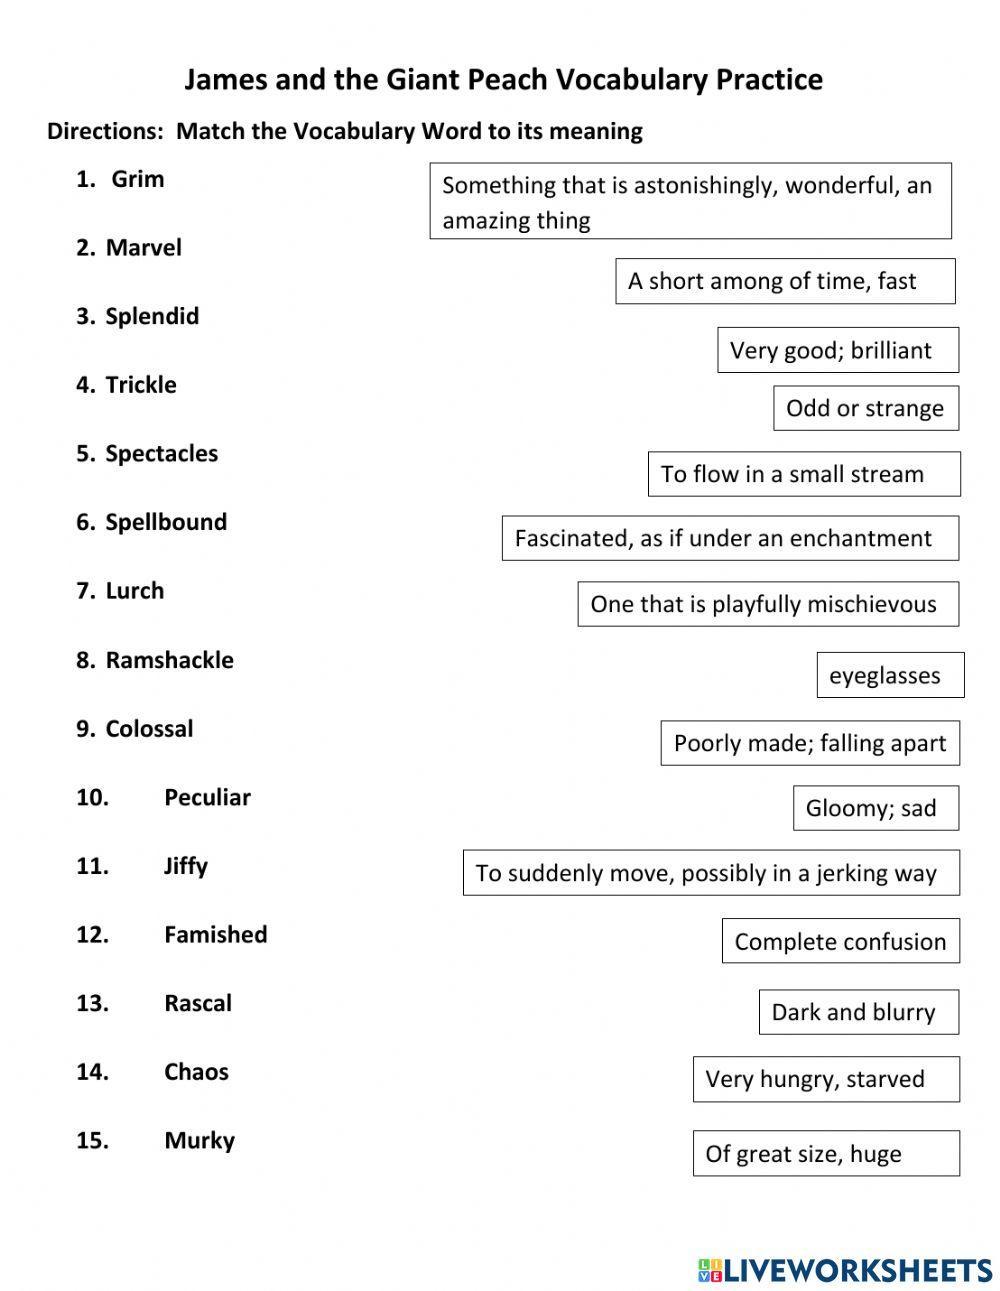 james-and-the-giant-peach-vocabulary-worksheet-live-worksheets